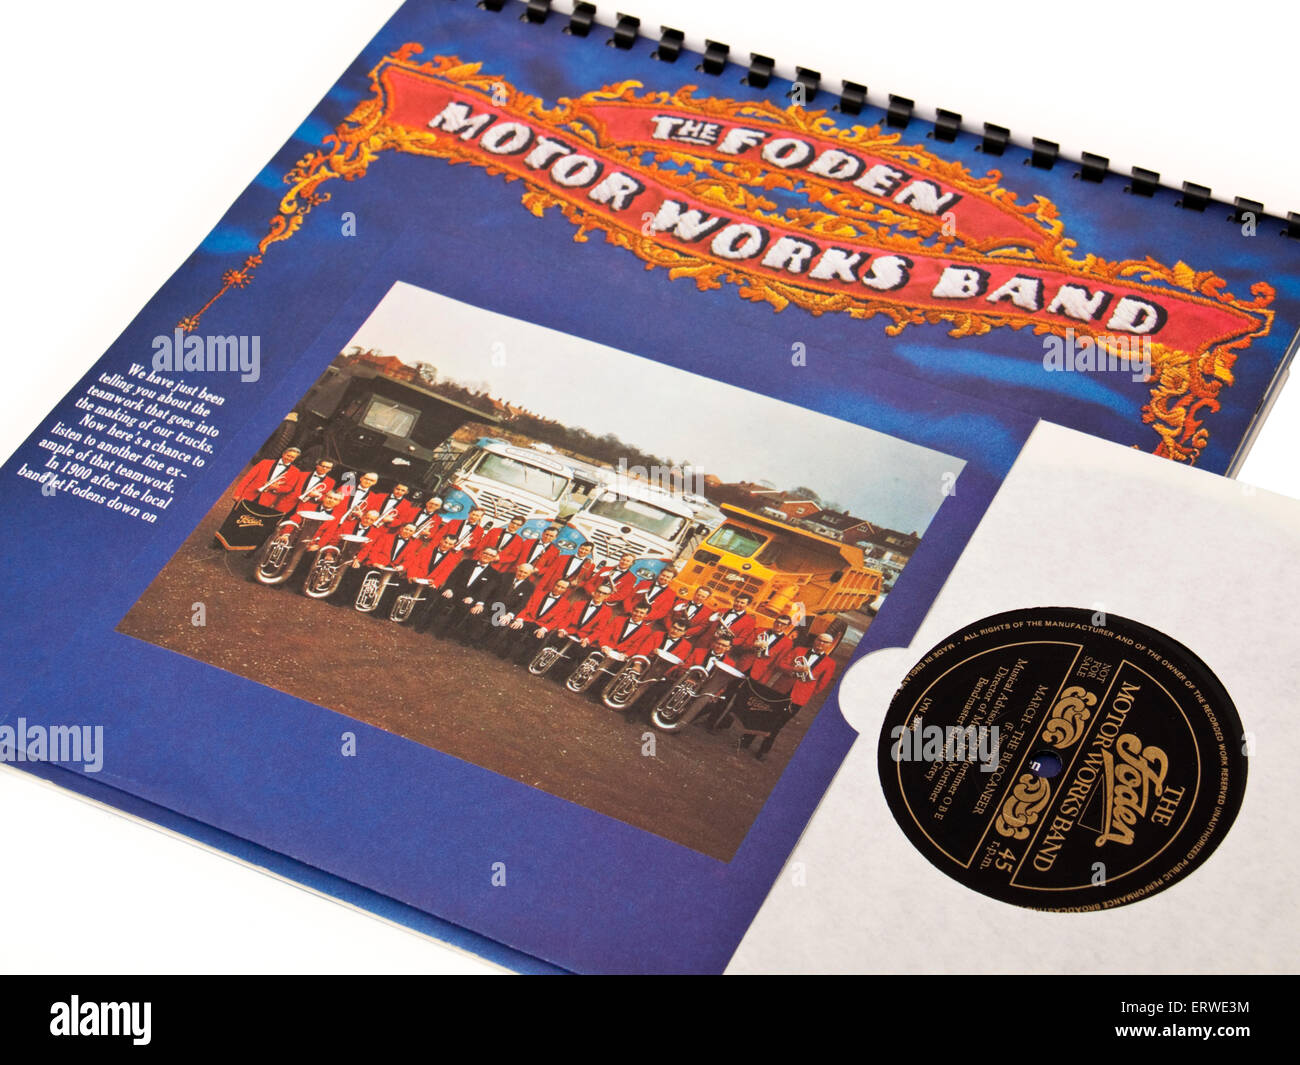 Foden Motor Works brass band page and 45rpm record in the company brochure from the early 1970's. Stock Photo